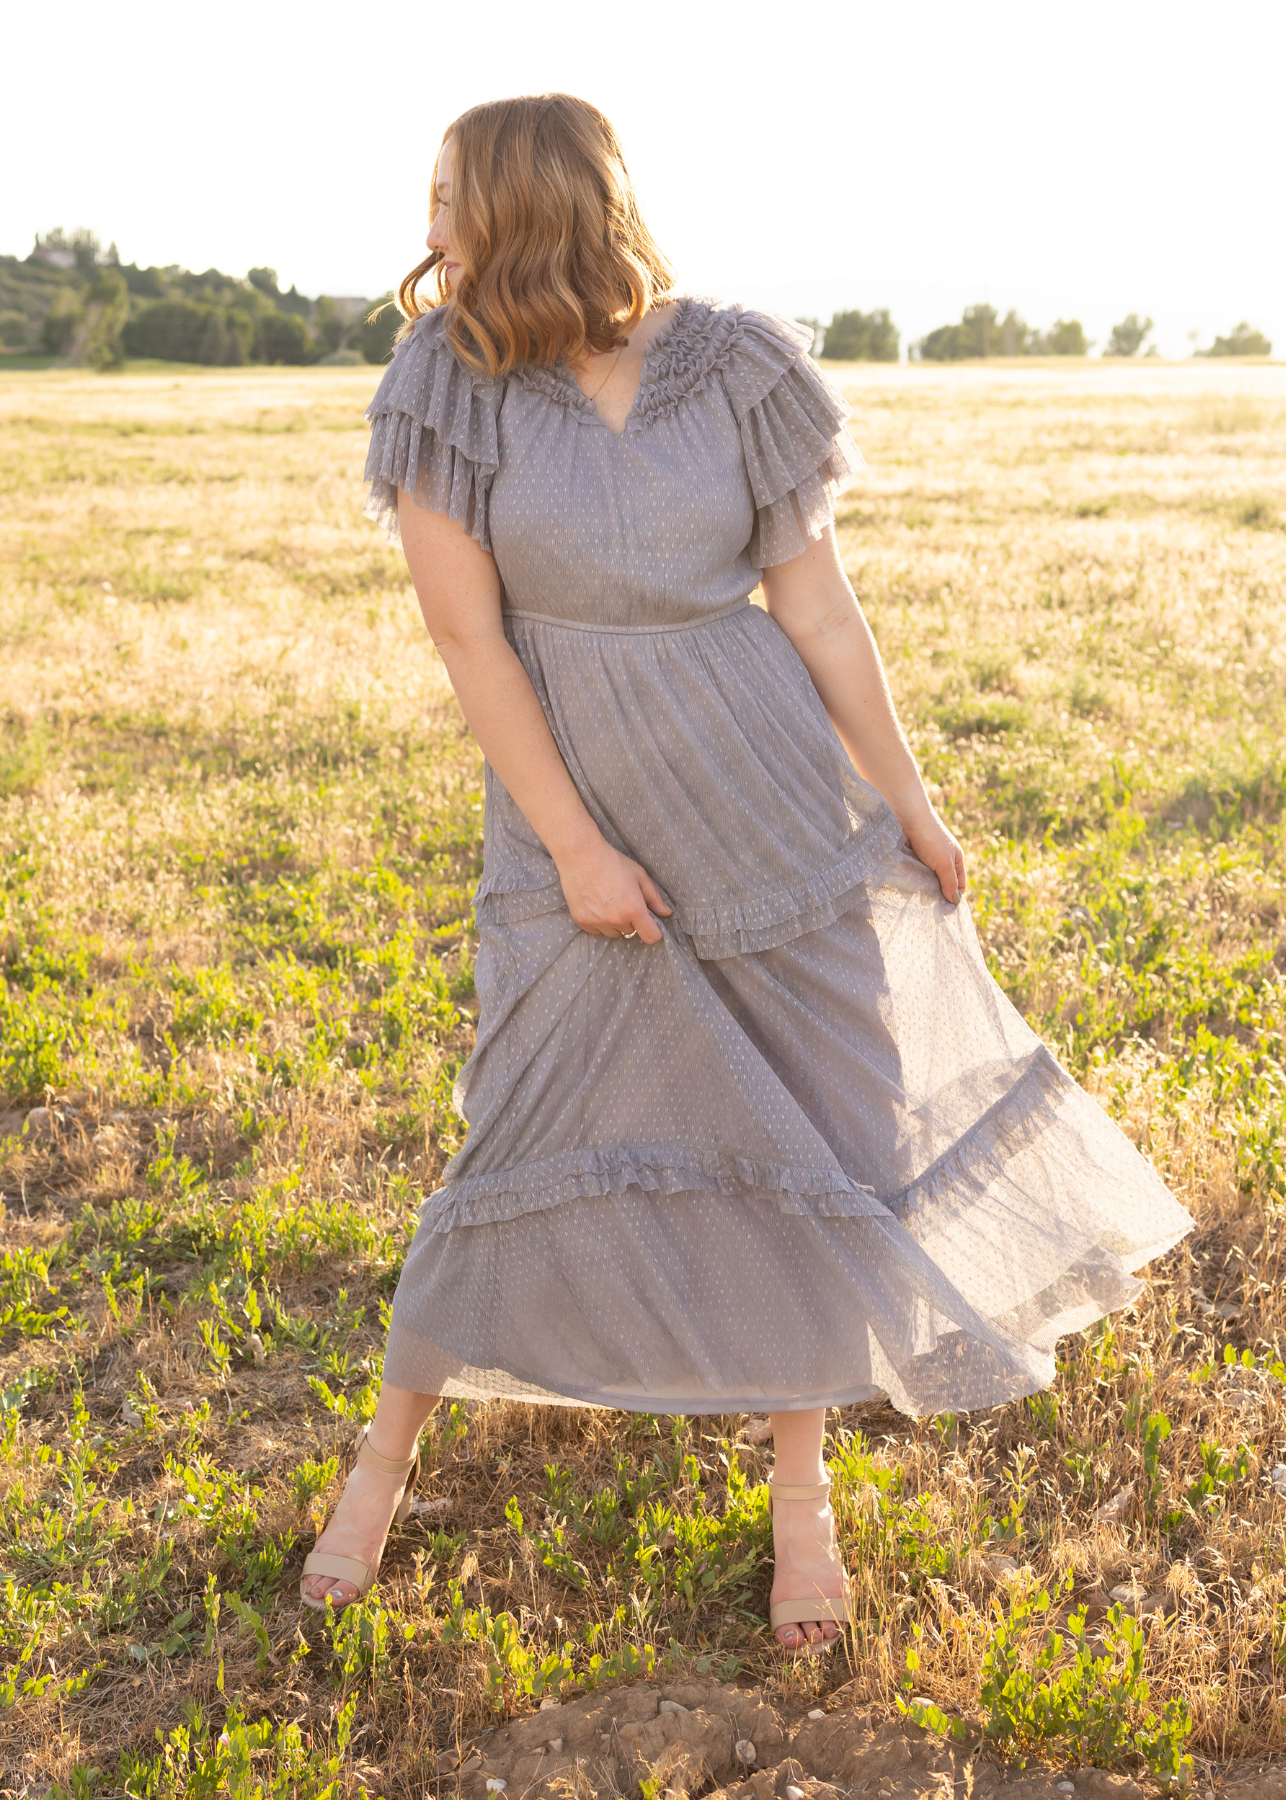 Short sleeve blue gray dress with ruffles on the sleeves